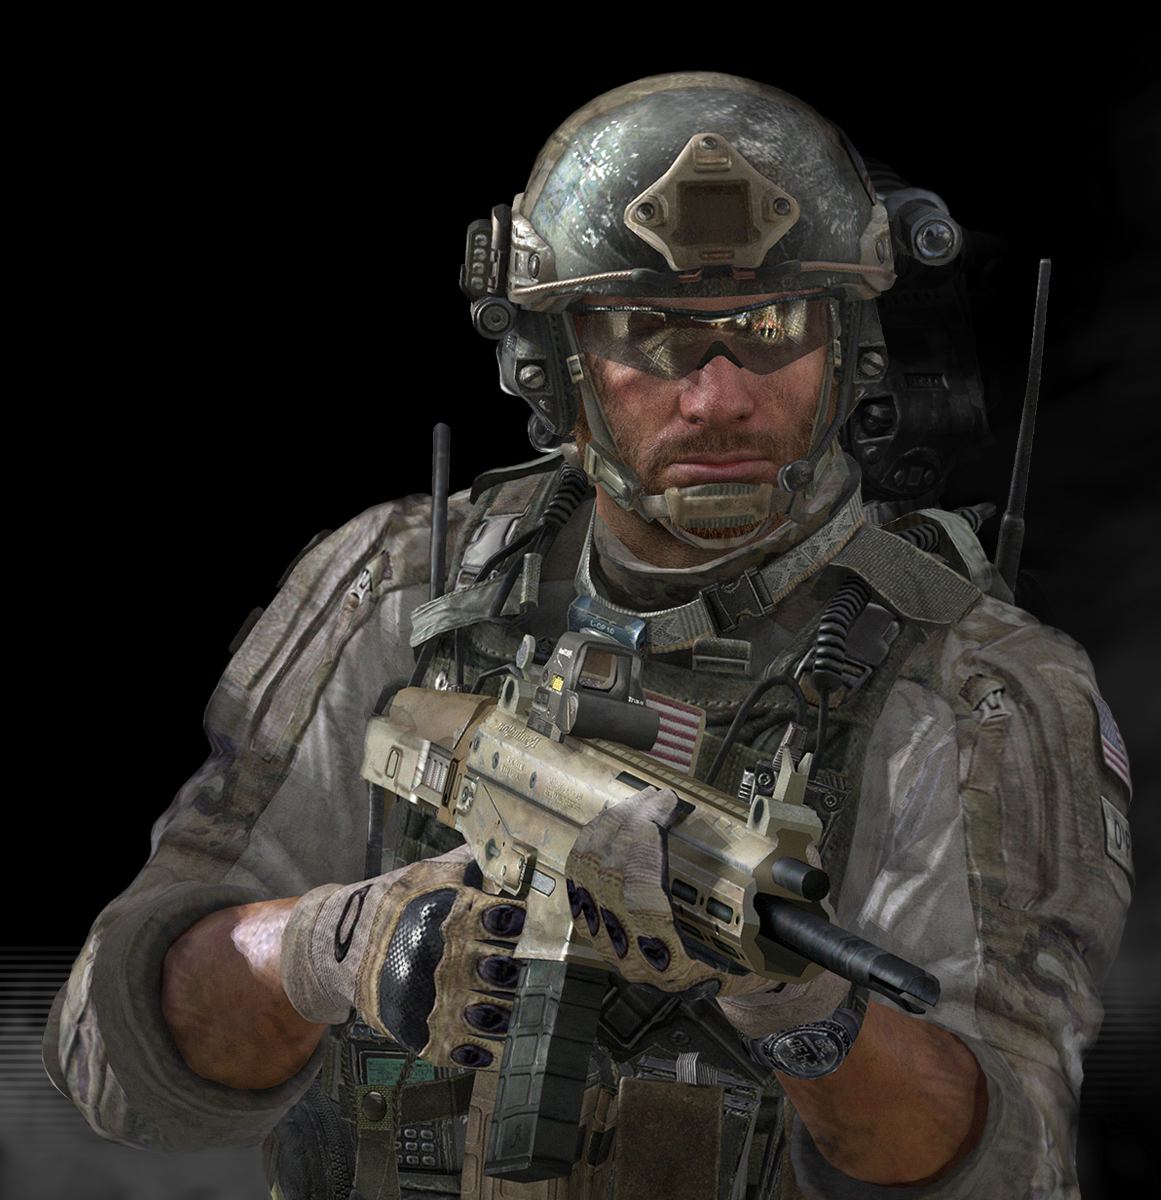 call of duty mw3 characters